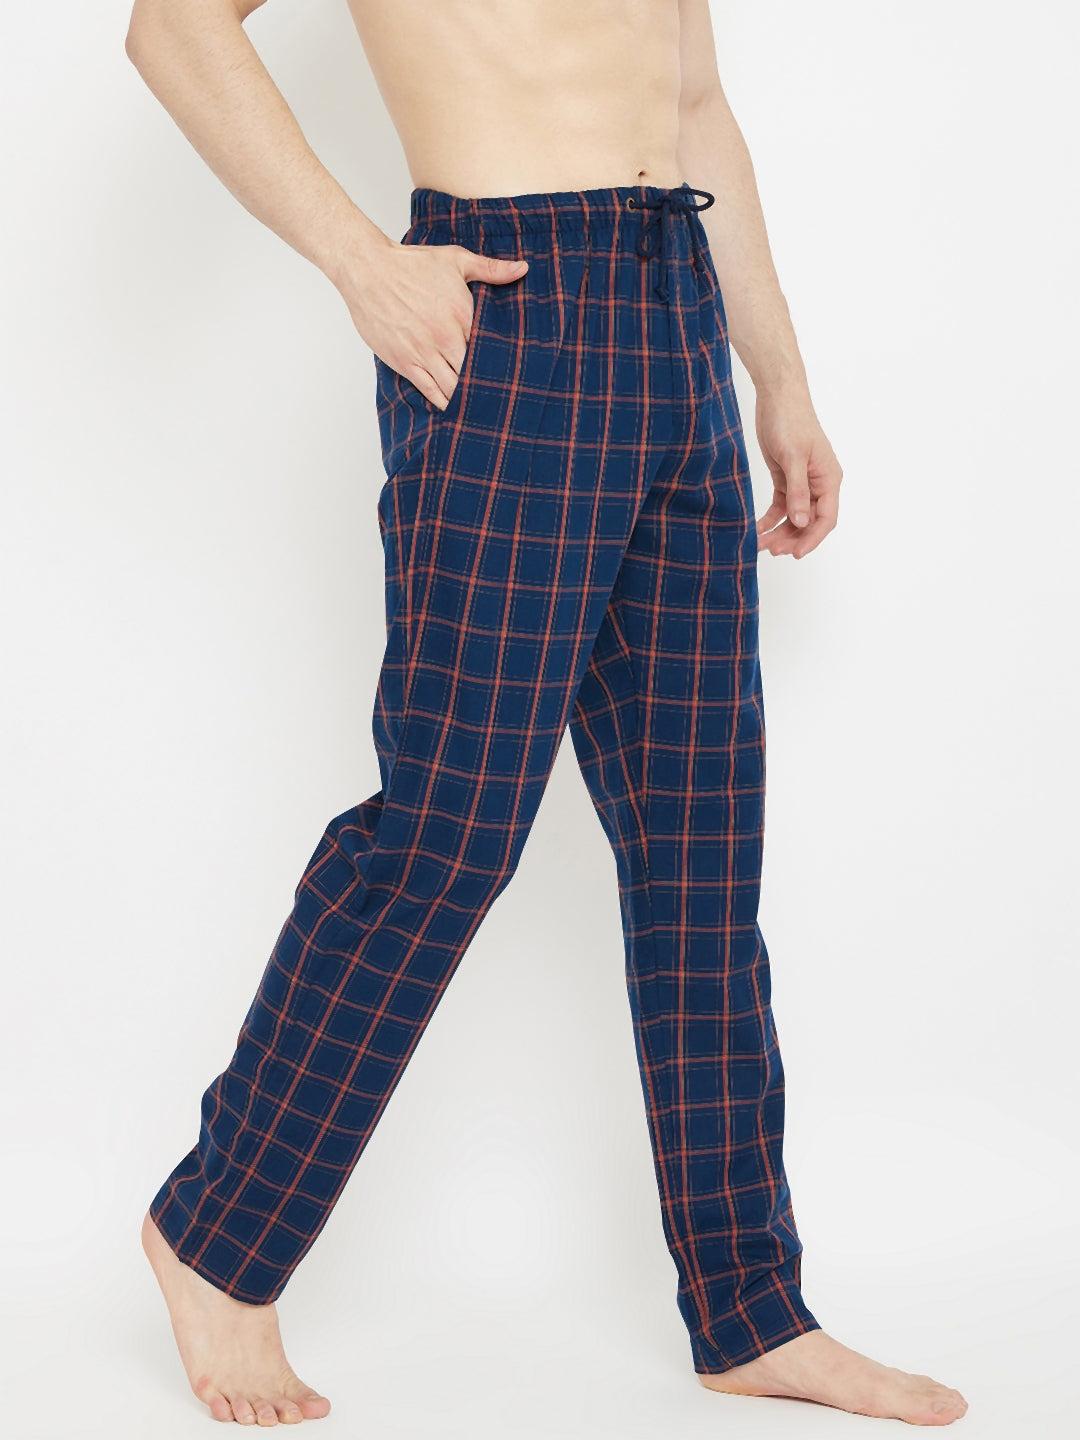 Navy Blue Checked Straight Lounge Pants - Men Lounge Pants